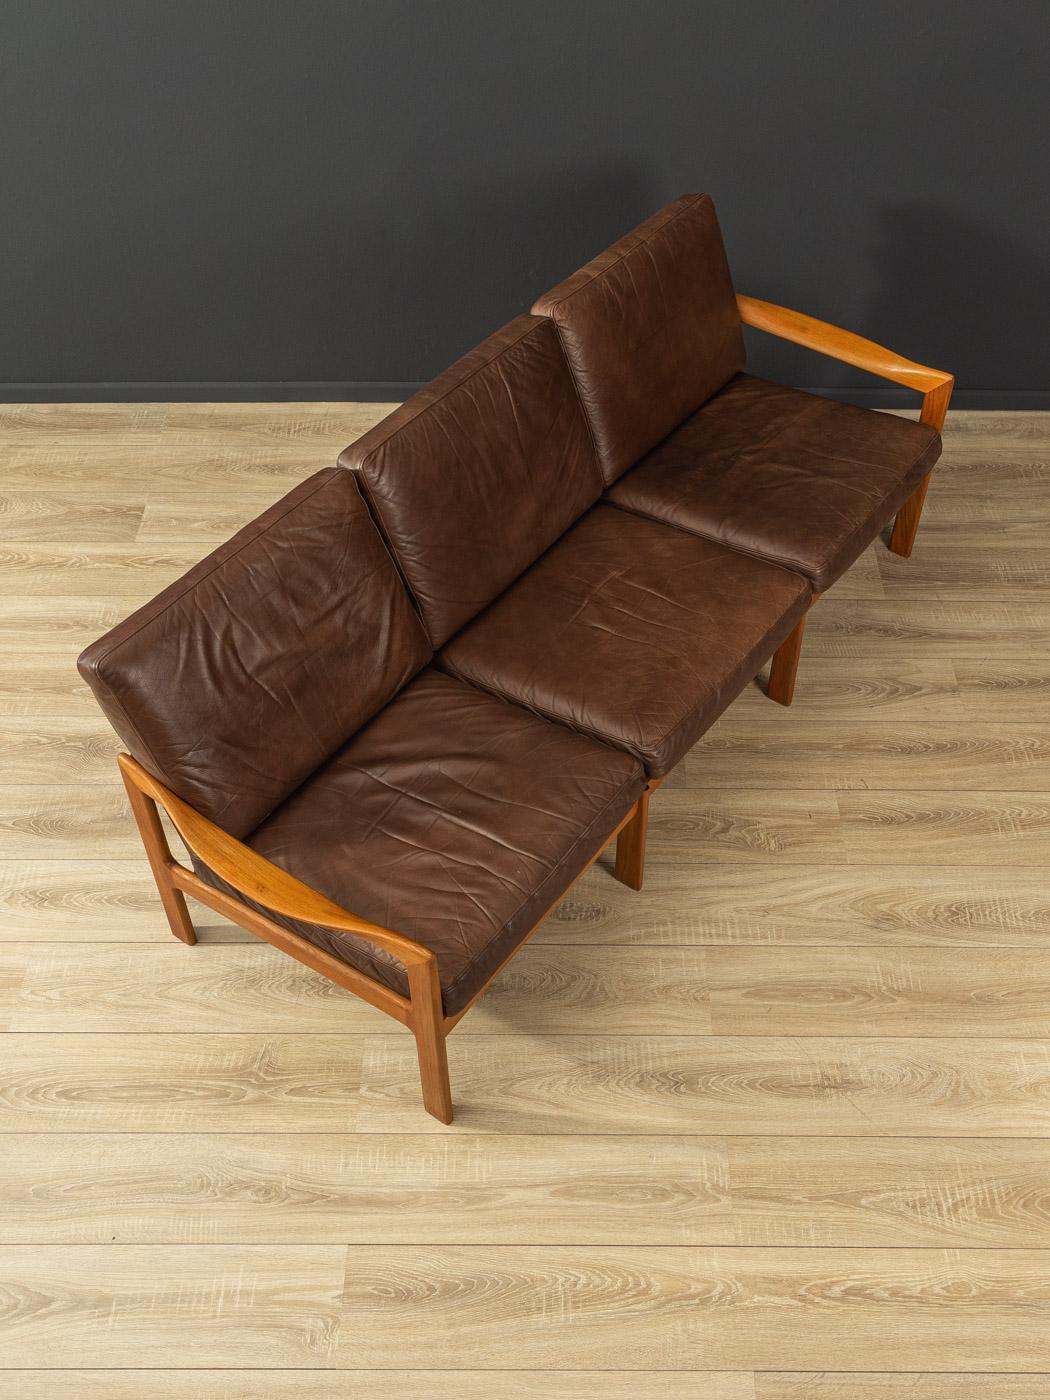 Mid-20th Century Sofa from the 1960s Designed by Illum Wikkelsø, Made in Denmark For Sale